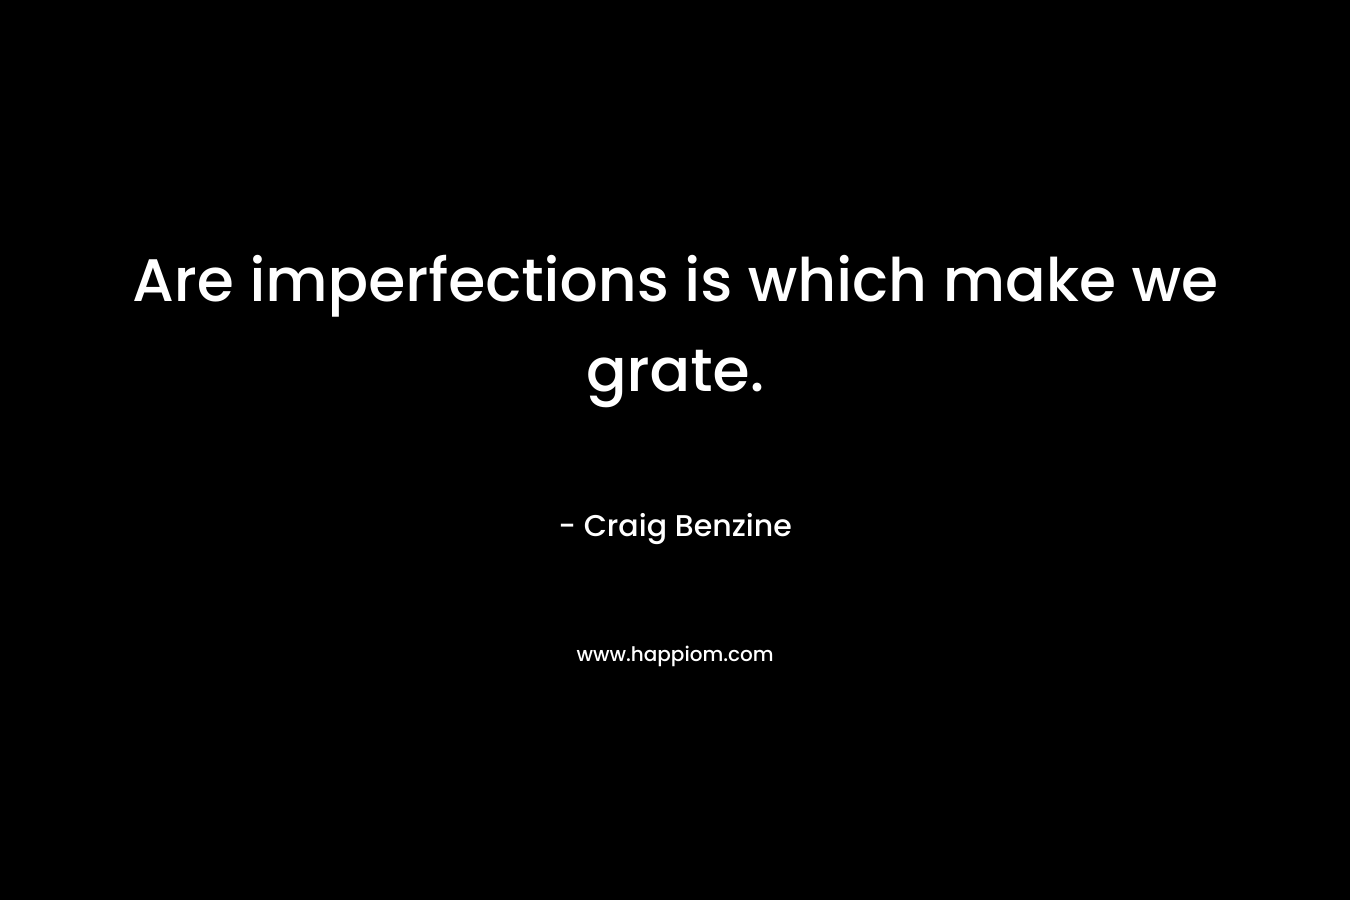 Are imperfections is which make we grate.